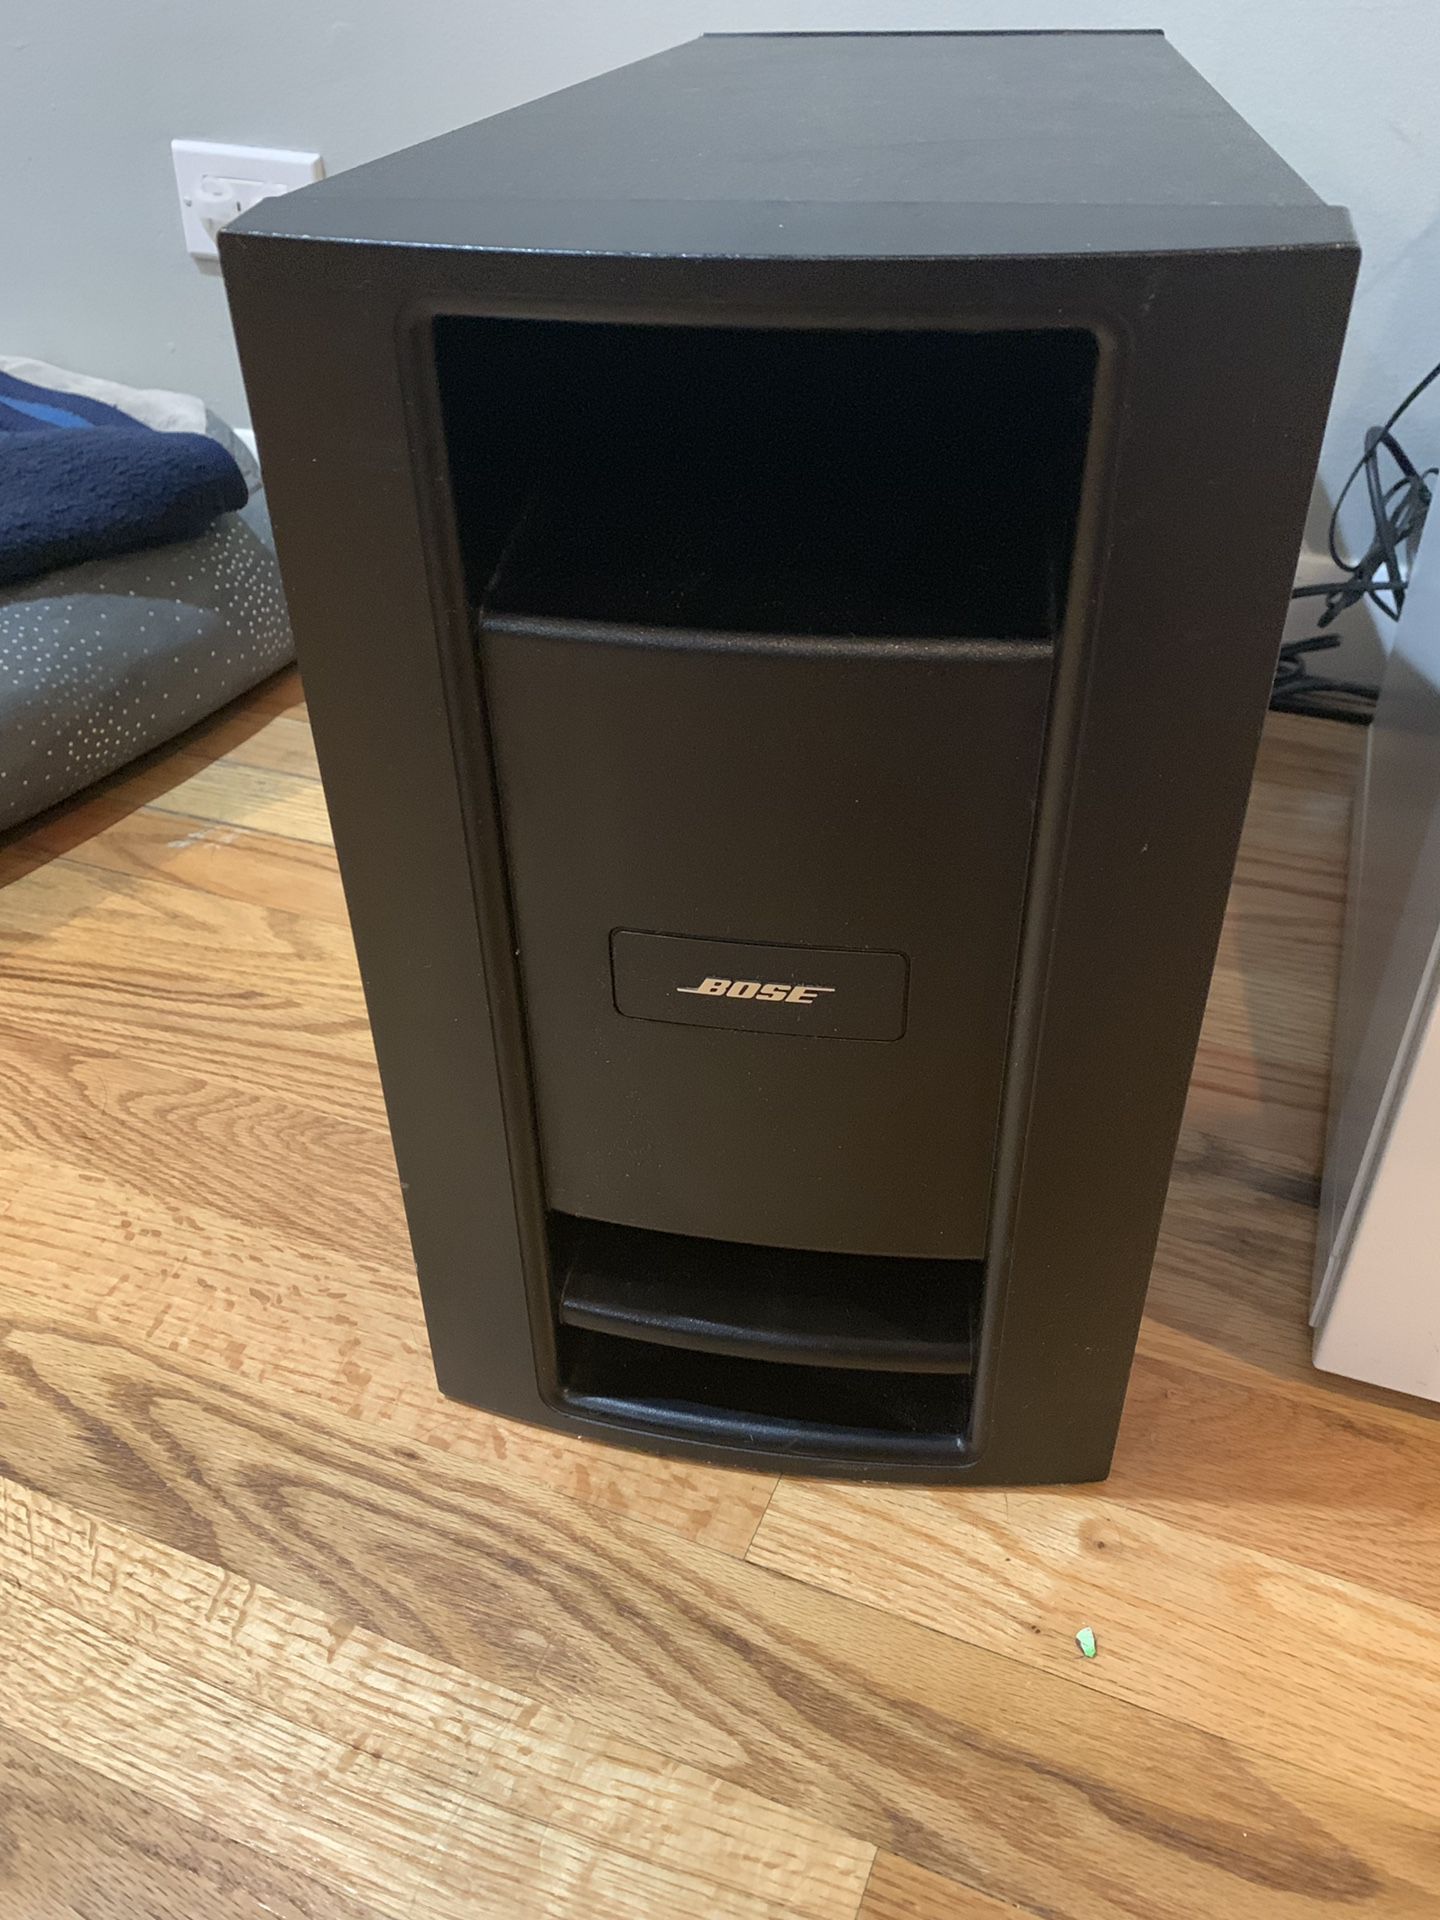 Bose Surround Sounds System